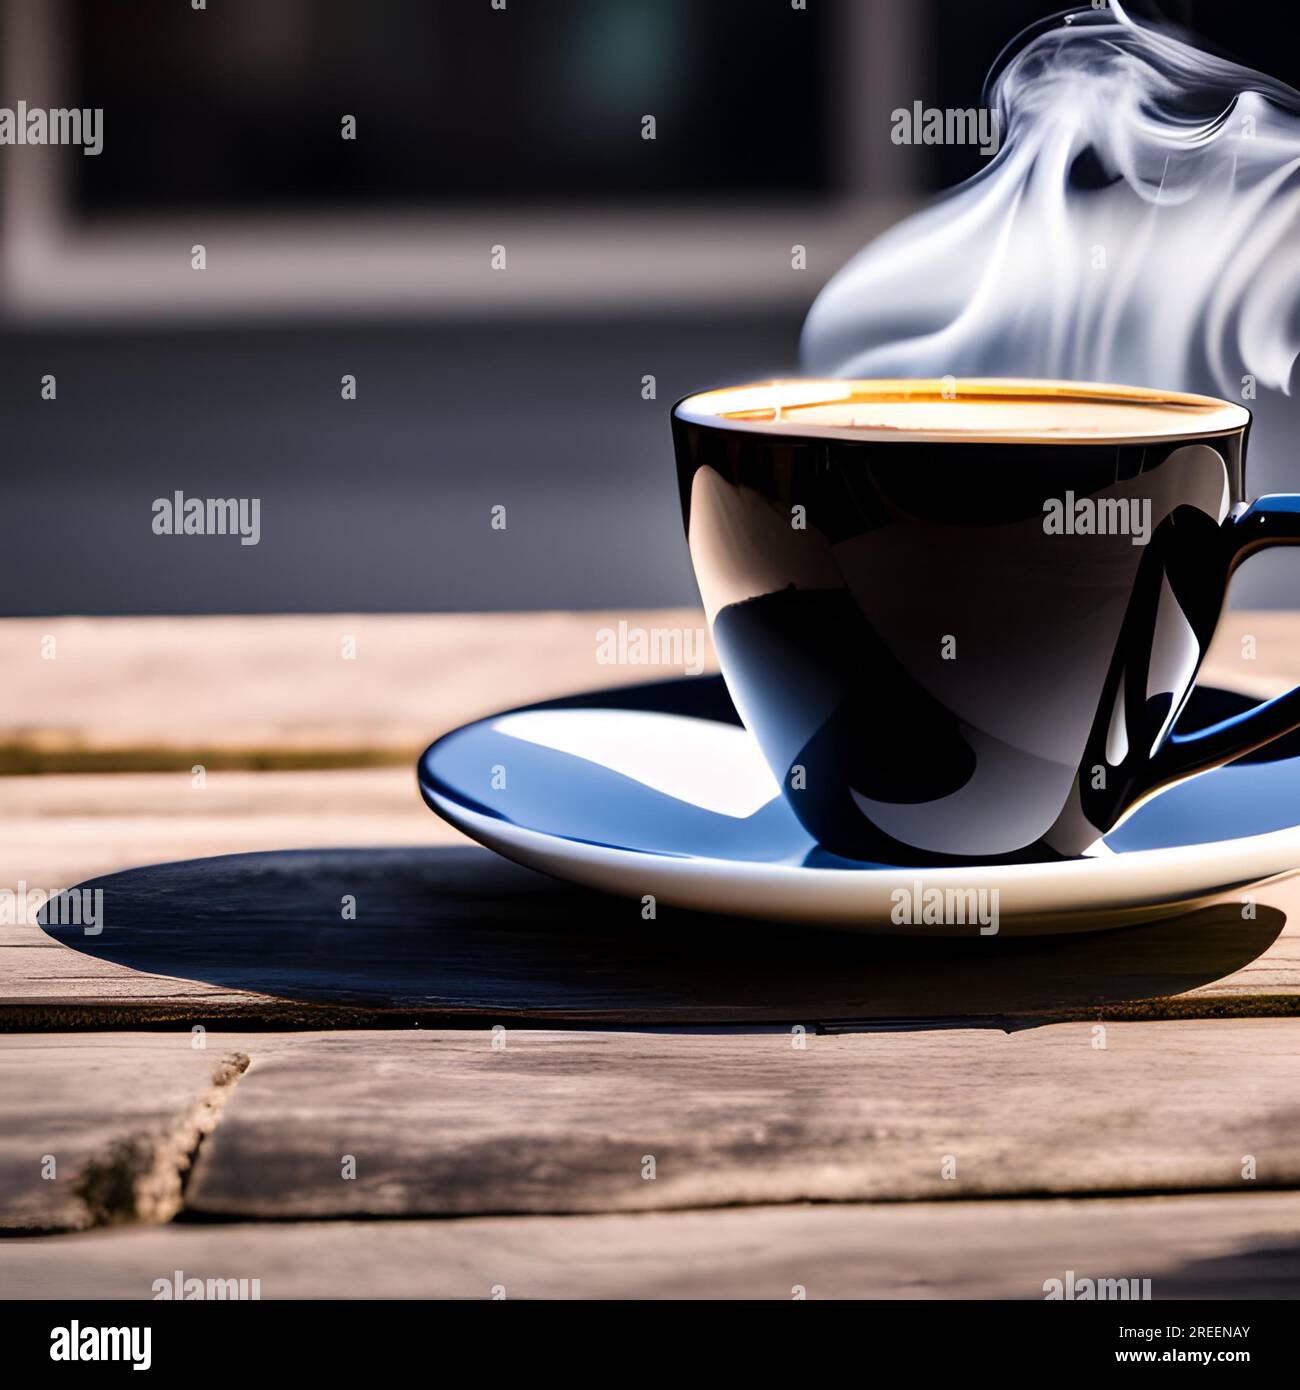 A smoky blue cup on a wooden table in daylight. Stock Photo